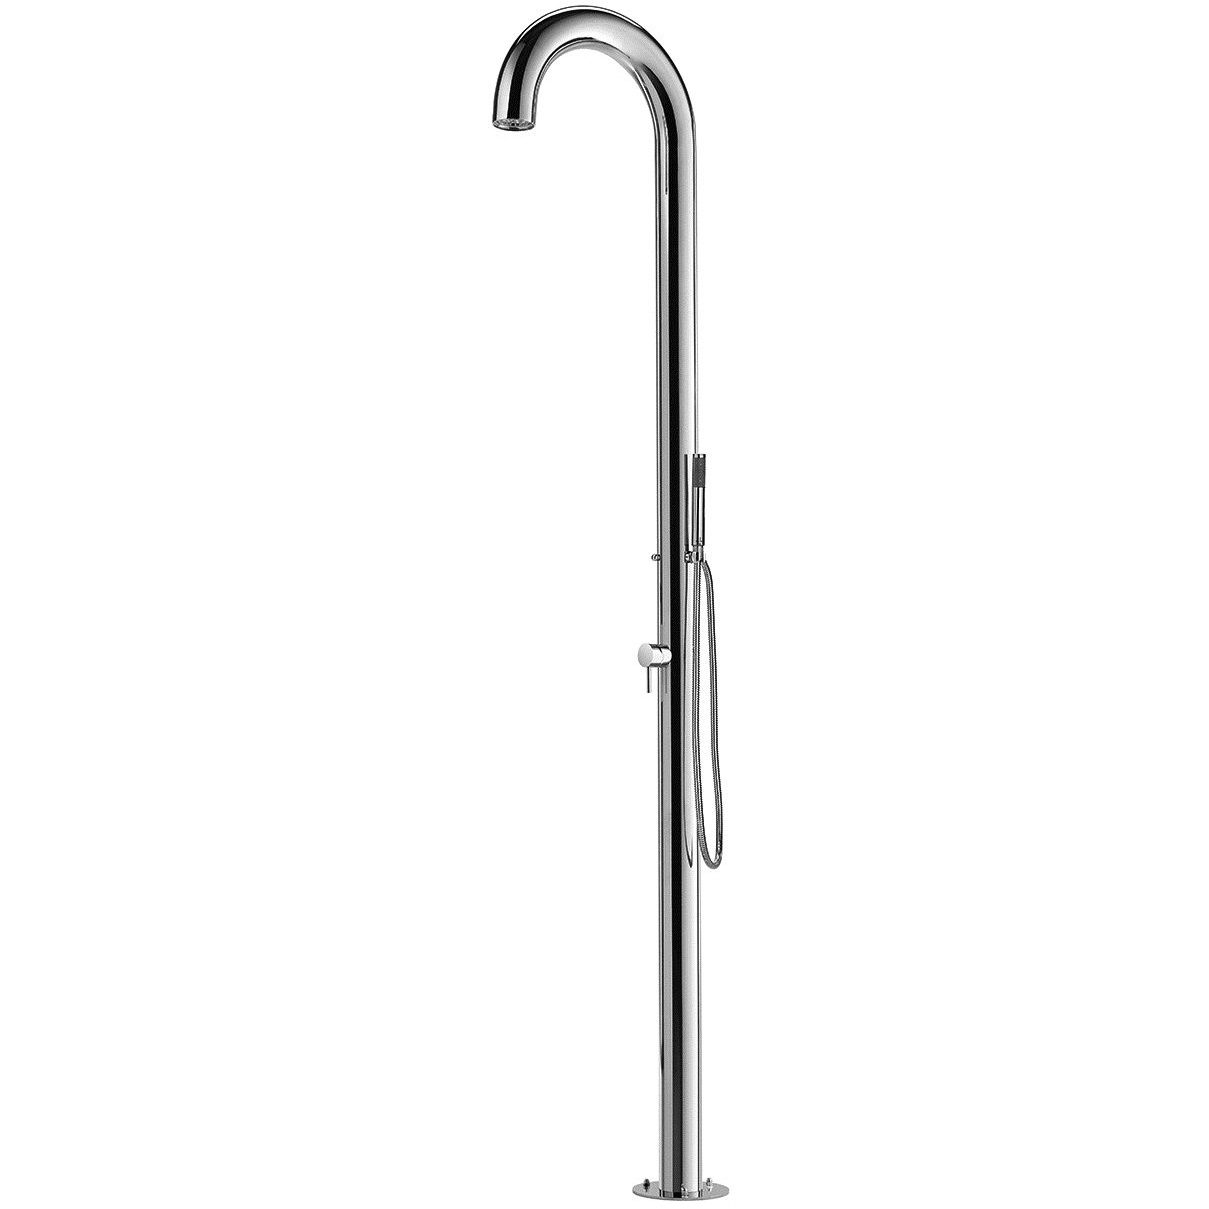 Club C90 316 Marine Grade Stainless Steel Free Standing Hot and Cold Shower Column with Hand Spray